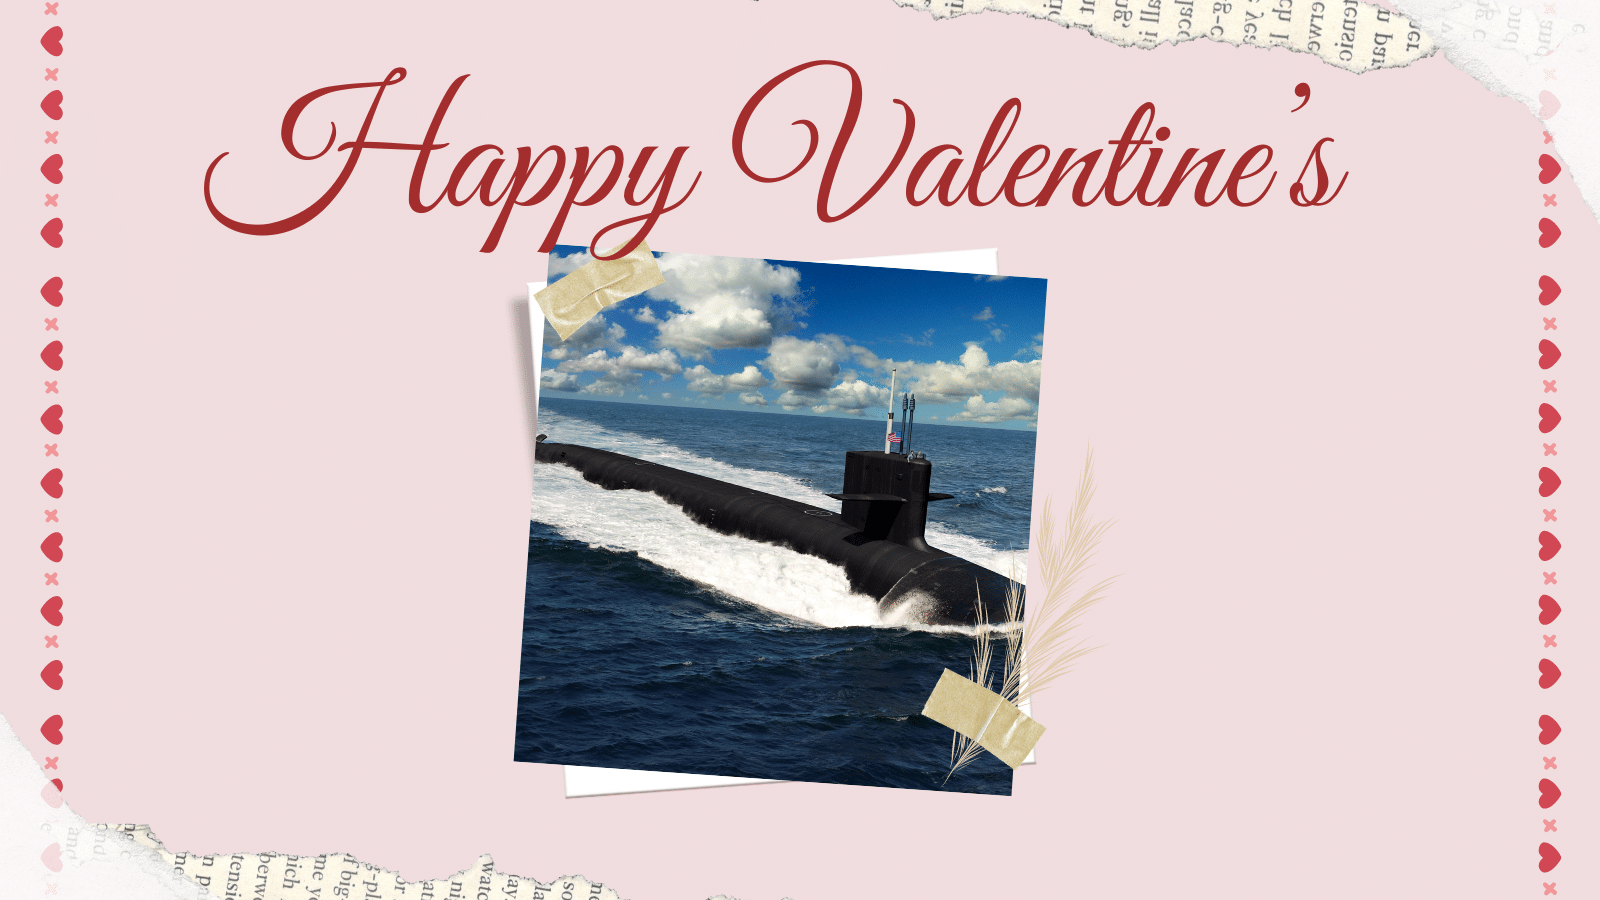 A picture of a Columbia Class Submarine areound a pink frame lined with hearts and large scripted text reading "Happy Valentine's Day"